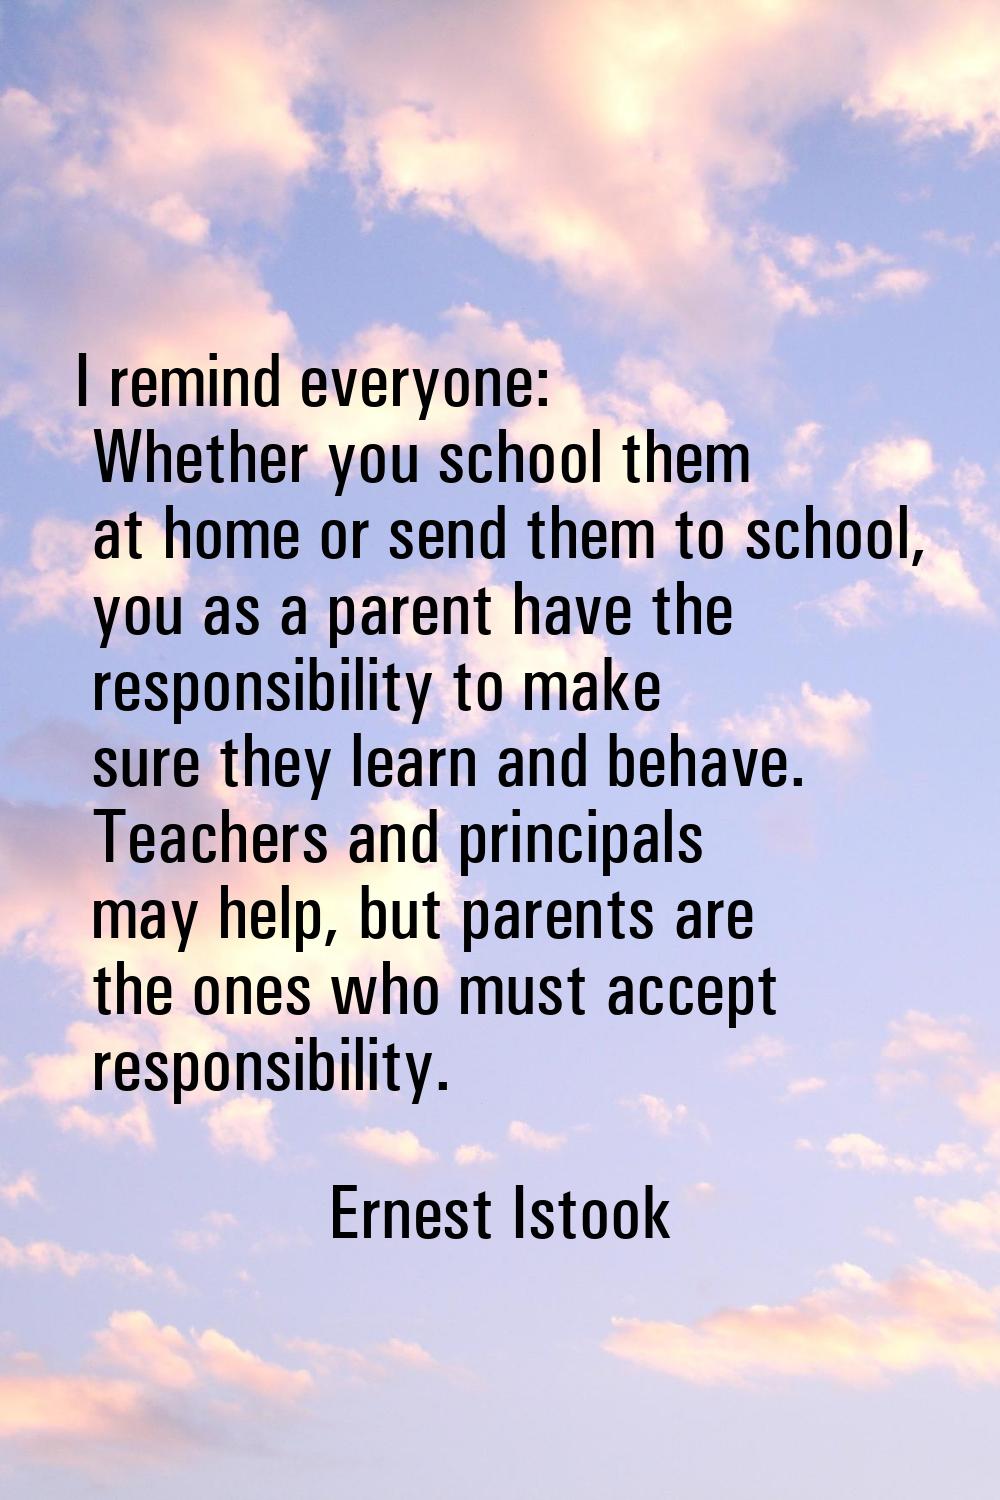 I remind everyone: Whether you school them at home or send them to school, you as a parent have the